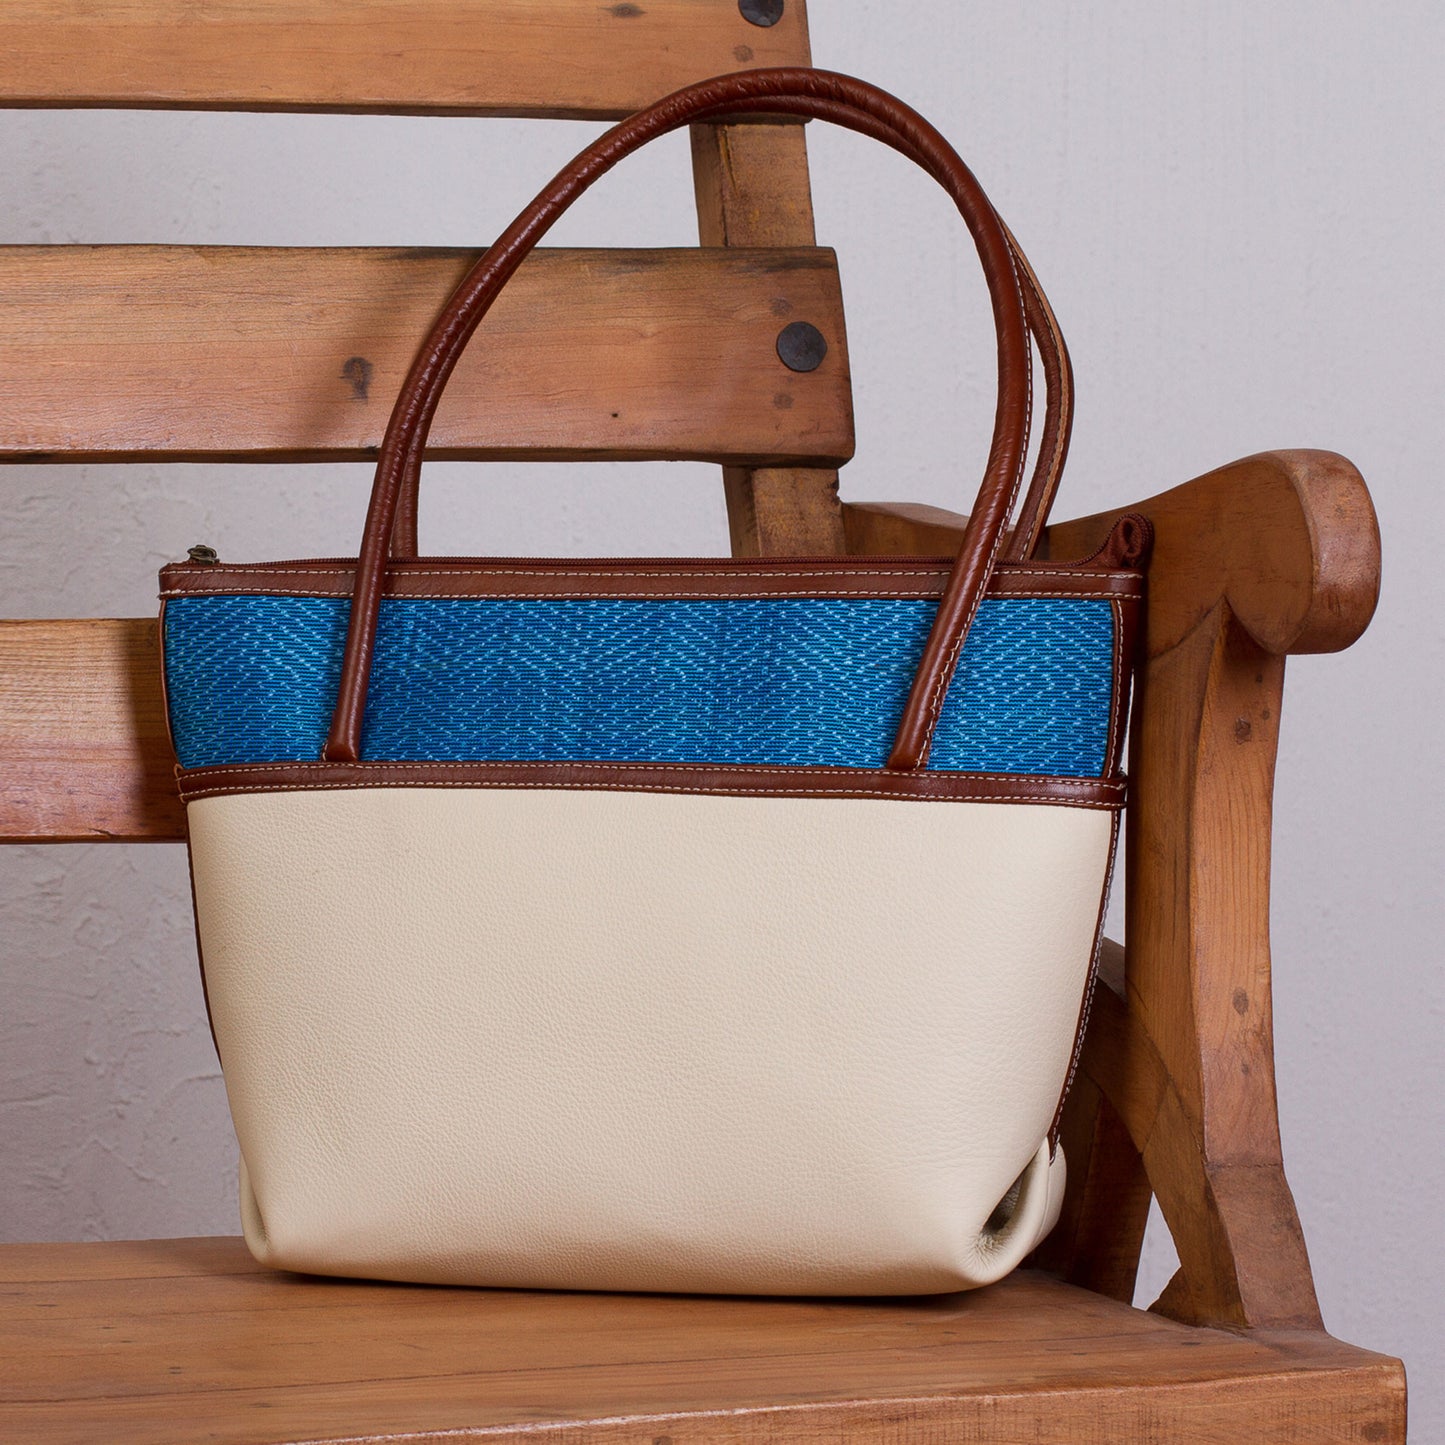 'Pale Beige Intersection' Handcrafted Leather and Palm Shoulder Bag